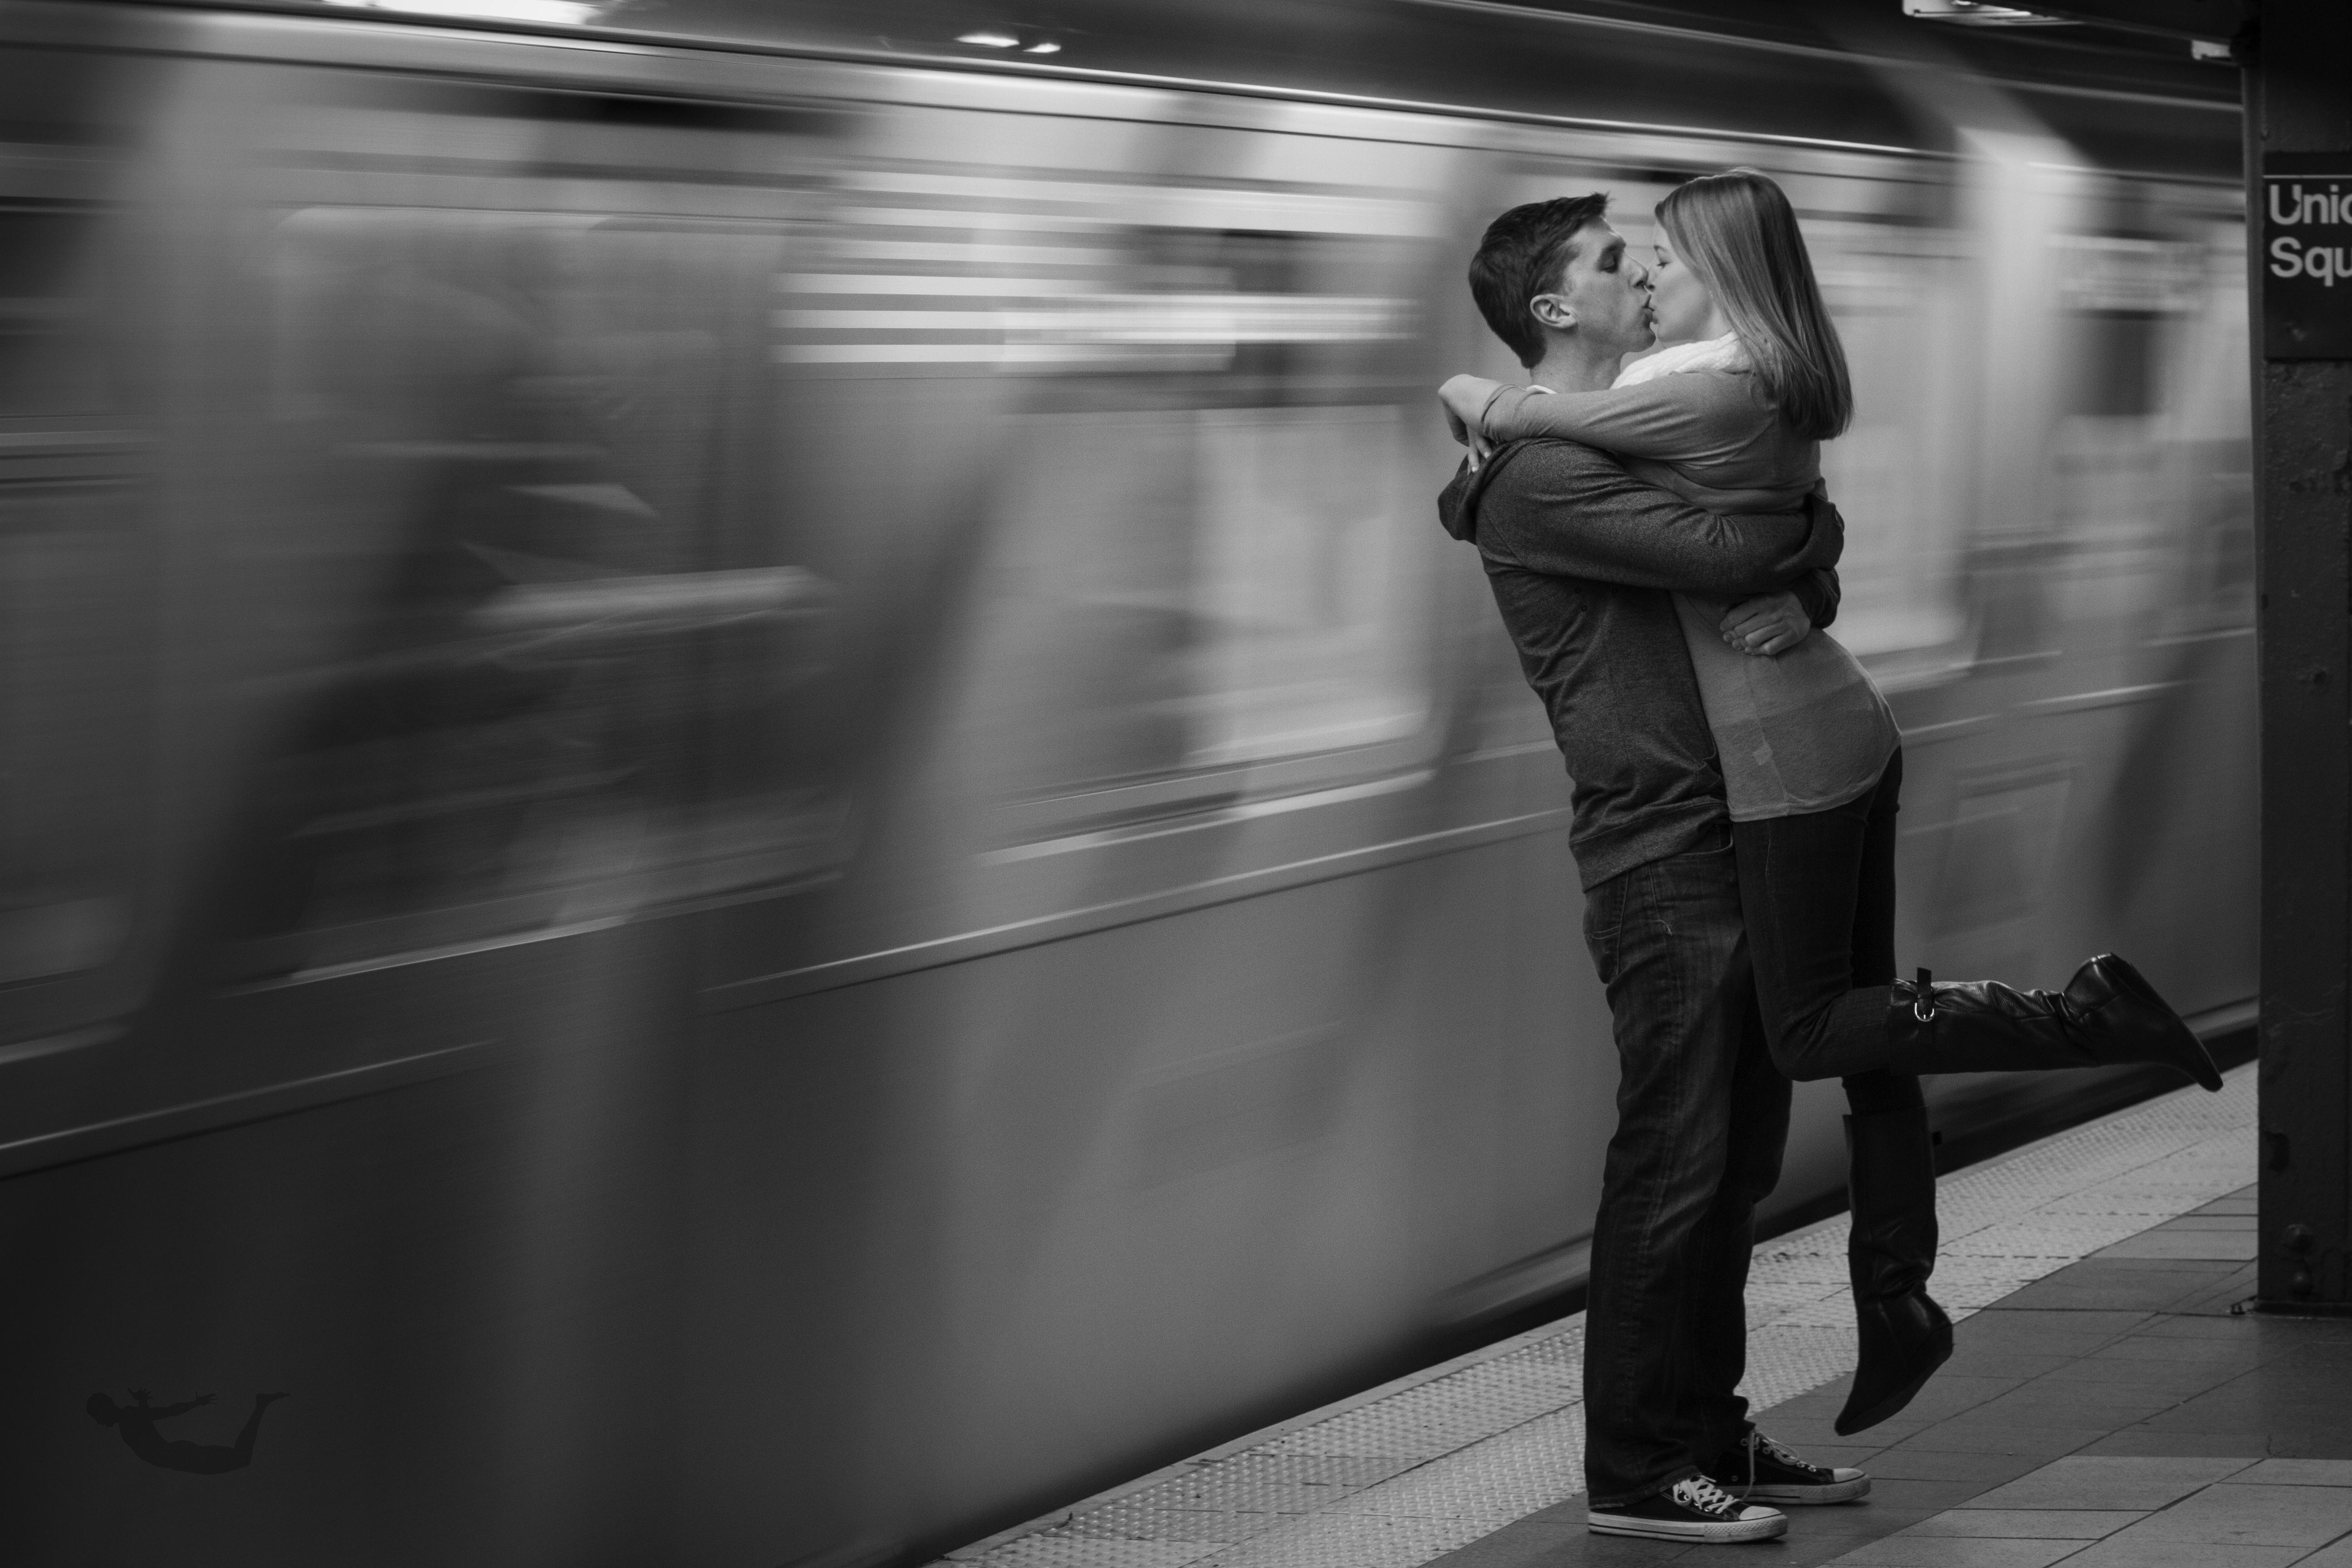 Wallpaper, street, Gentleman, friendship, couple, square, standing, kissing, subway, warm, underground, romance, infrastructure, light, trains, girl, human, photograph, ny, nyc, darkness, embrace, forever, snapshot, union, black and white, monochrome